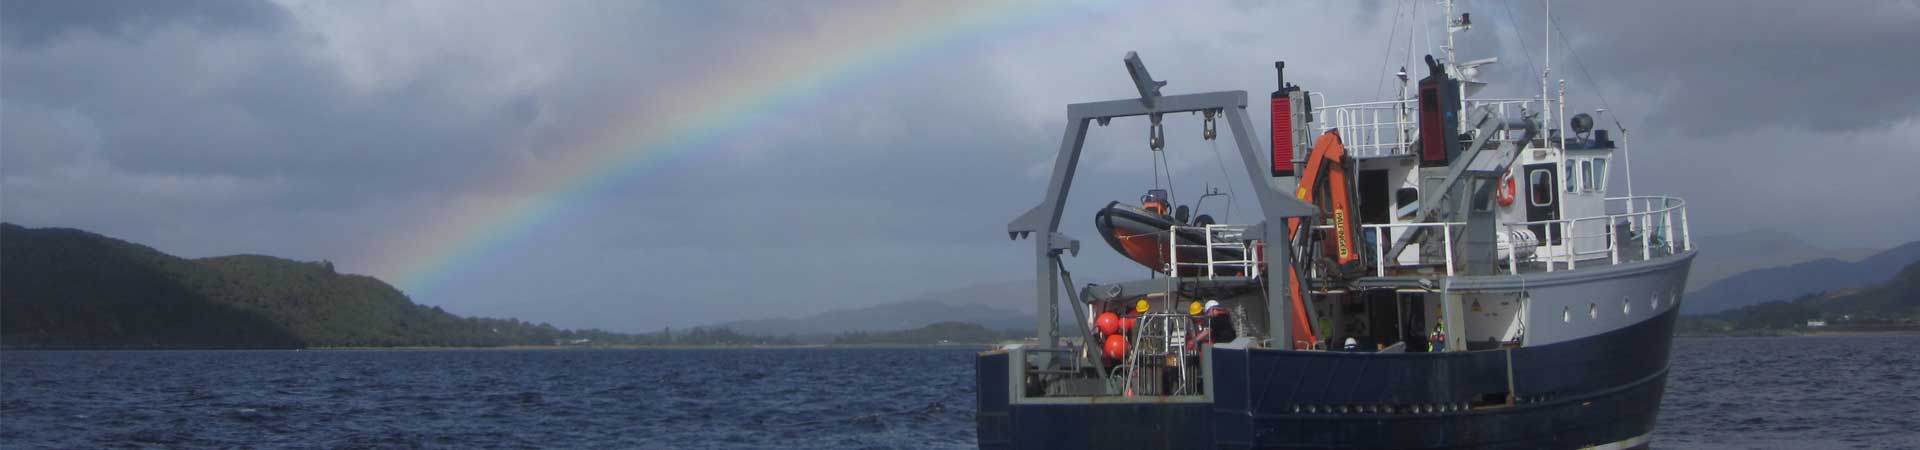 Image of SAMS research vessel with rainbow behind